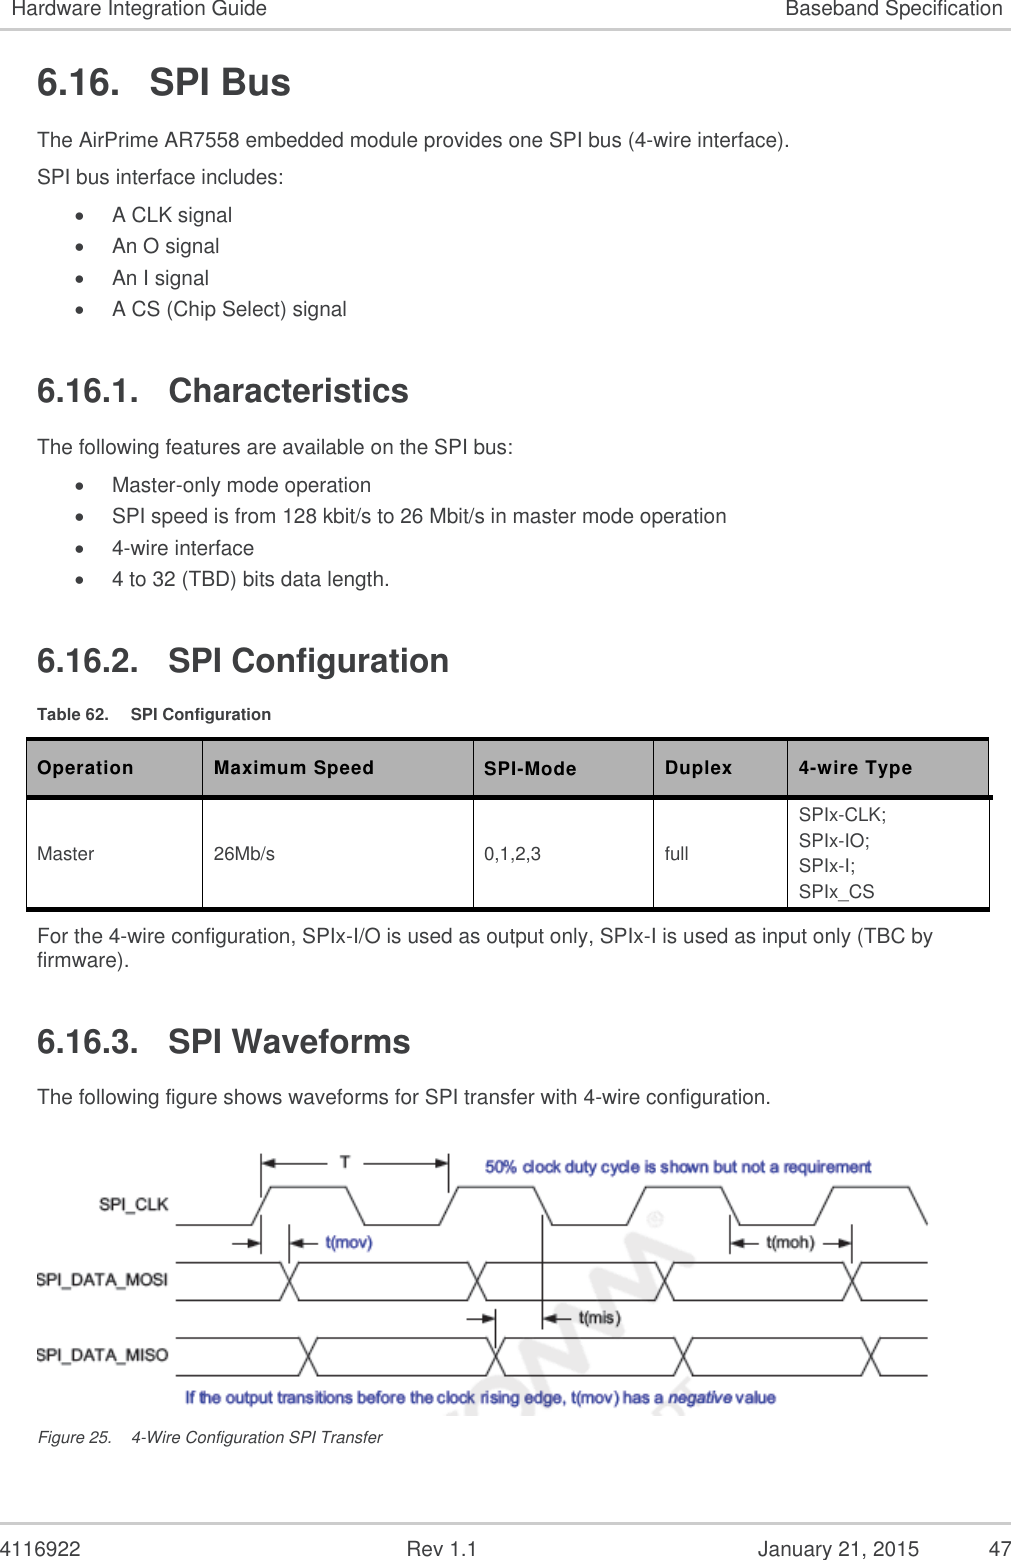   4116922              Rev 1.1          January 21, 2015  47 Hardware Integration Guide Baseband Specification 6.16.  SPI Bus The AirPrime AR7558 embedded module provides one SPI bus (4-wire interface). SPI bus interface includes:  A CLK signal  An O signal  An I signal  A CS (Chip Select) signal 6.16.1.  Characteristics The following features are available on the SPI bus:  Master-only mode operation  SPI speed is from 128 kbit/s to 26 Mbit/s in master mode operation  4-wire interface  4 to 32 (TBD) bits data length. 6.16.2.  SPI Configuration Table 62.  SPI Configuration Operation Maximum Speed SPI-Mode  Duplex 4-wire Type Master 26Mb/s 0,1,2,3 full SPIx-CLK; SPIx-IO; SPIx-I; SPIx_CS For the 4-wire configuration, SPIx-I/O is used as output only, SPIx-I is used as input only (TBC by firmware). 6.16.3.  SPI Waveforms The following figure shows waveforms for SPI transfer with 4-wire configuration.  Figure 25.  4-Wire Configuration SPI Transfer 